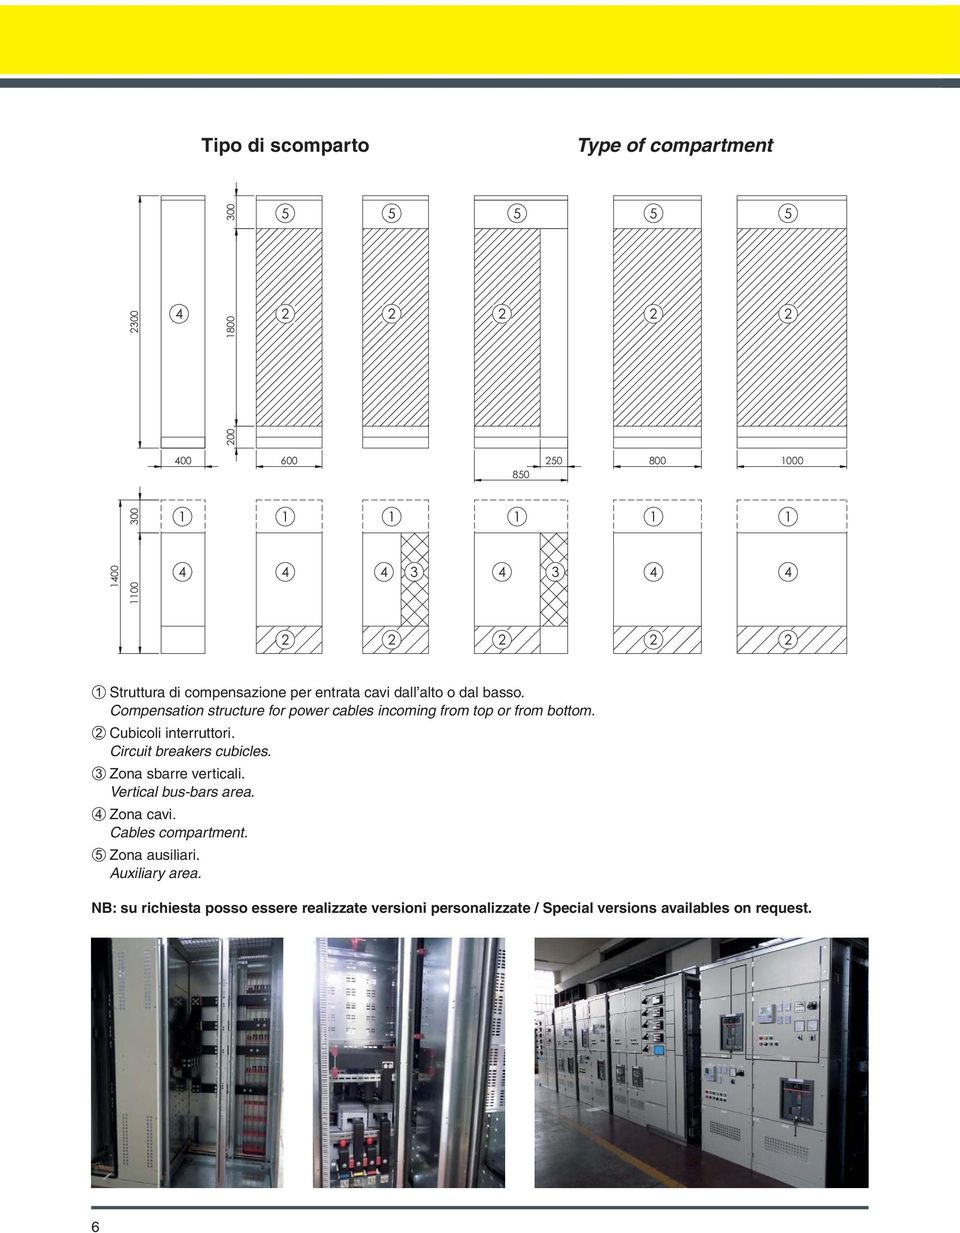 Compensation structure for power cables incoming from top or from bottom. Cubicoli interruttori. Circuit breakers cubicles.